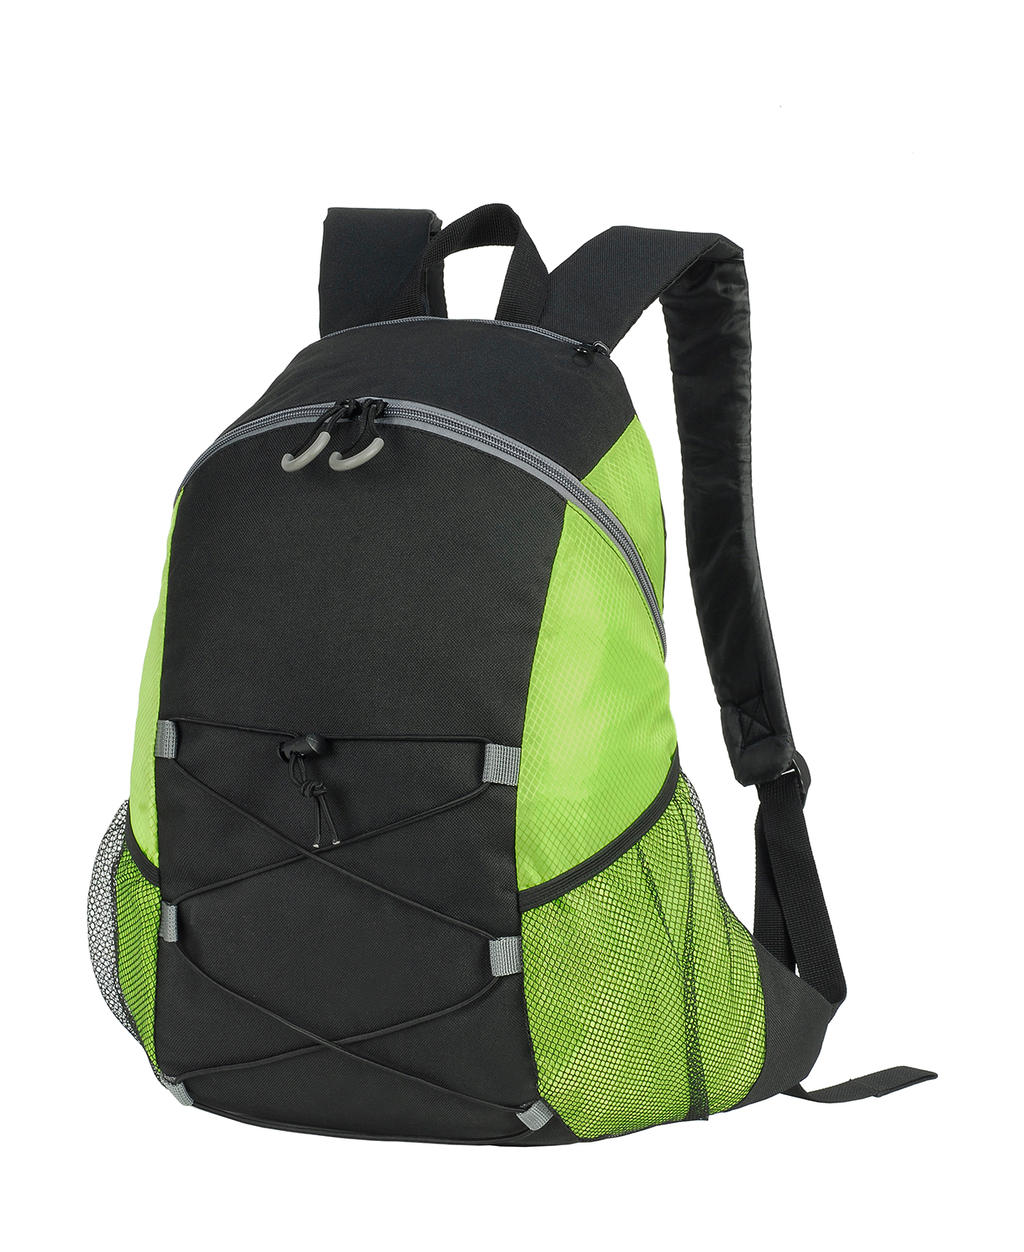  Chester Backpack in Farbe Black/Lime Green